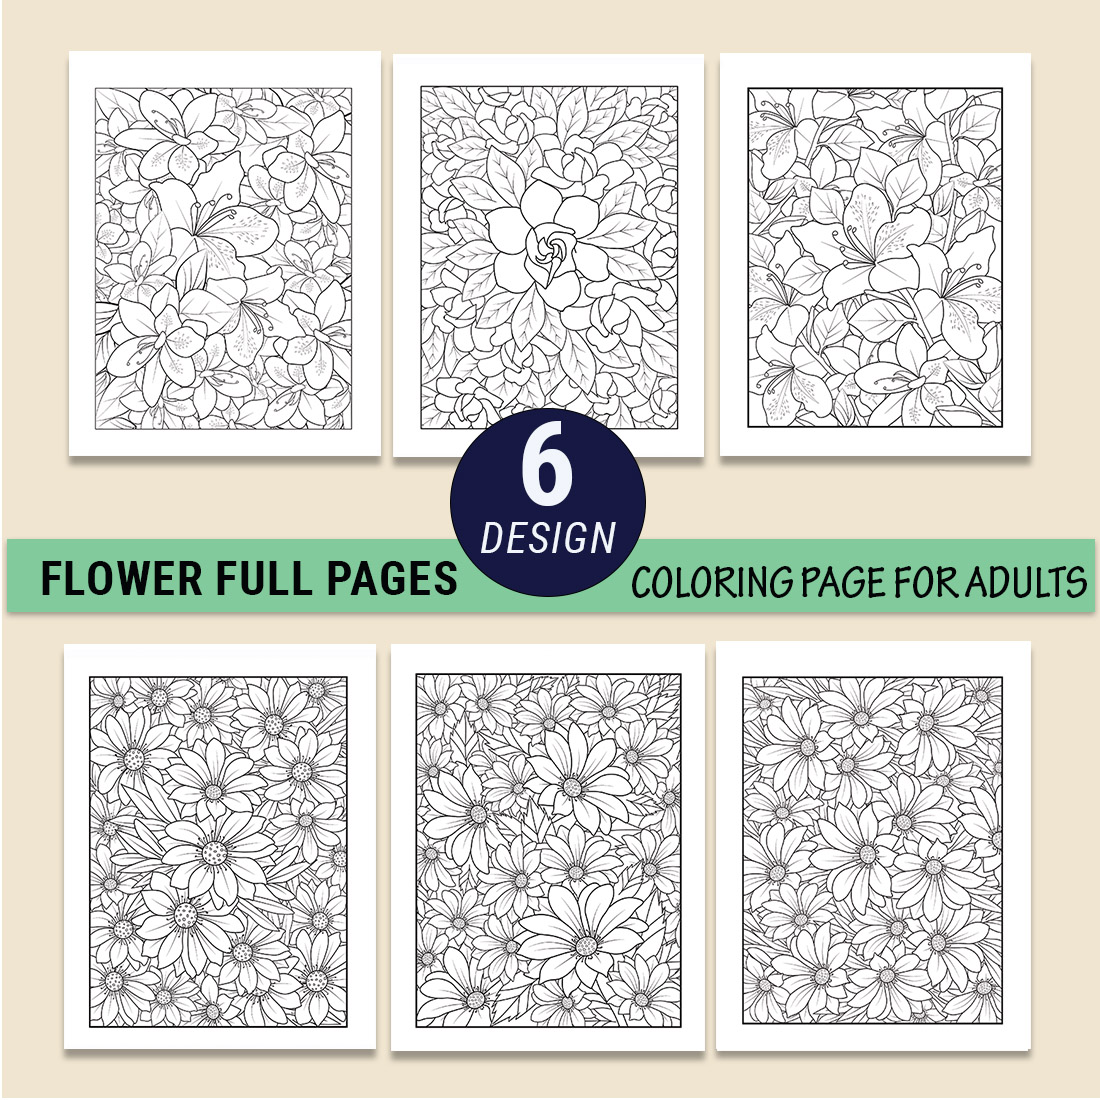 flower cluster drawing, relaxation flower coloring pages for adults, detailed flower coloring pages preview image.